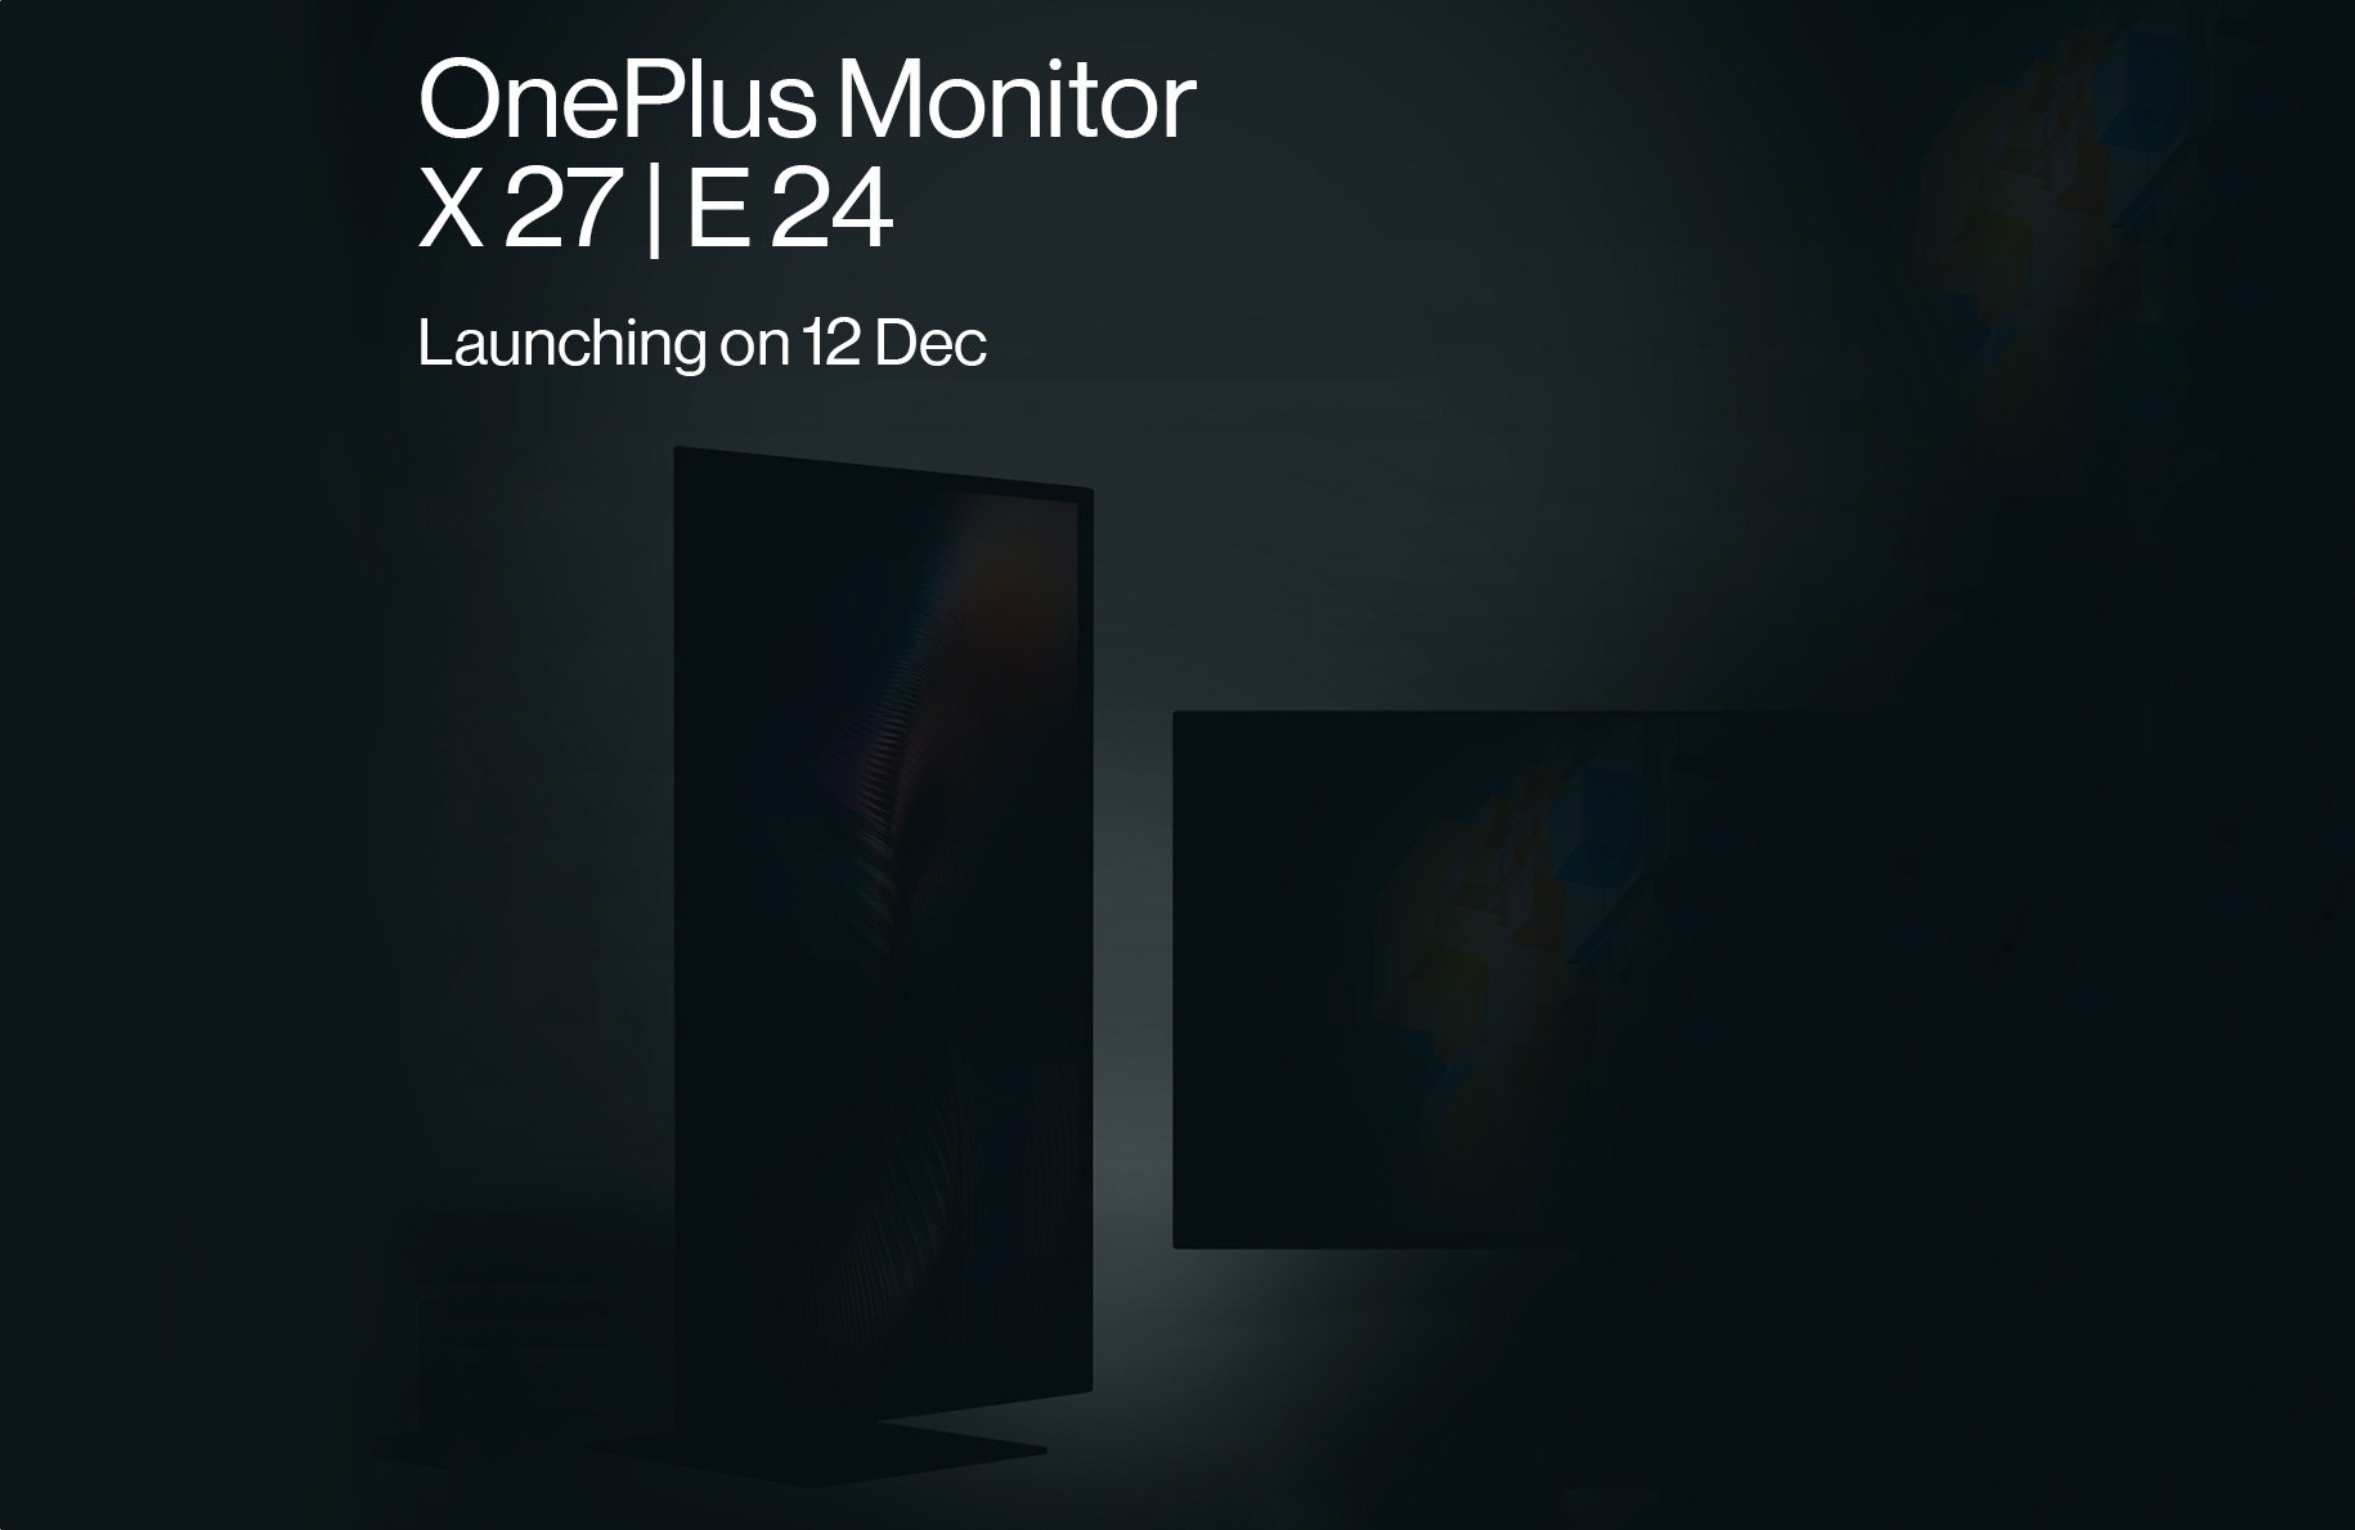 Unexpectedly! OnePlus will unveil X27 and E24 monitors on December 12